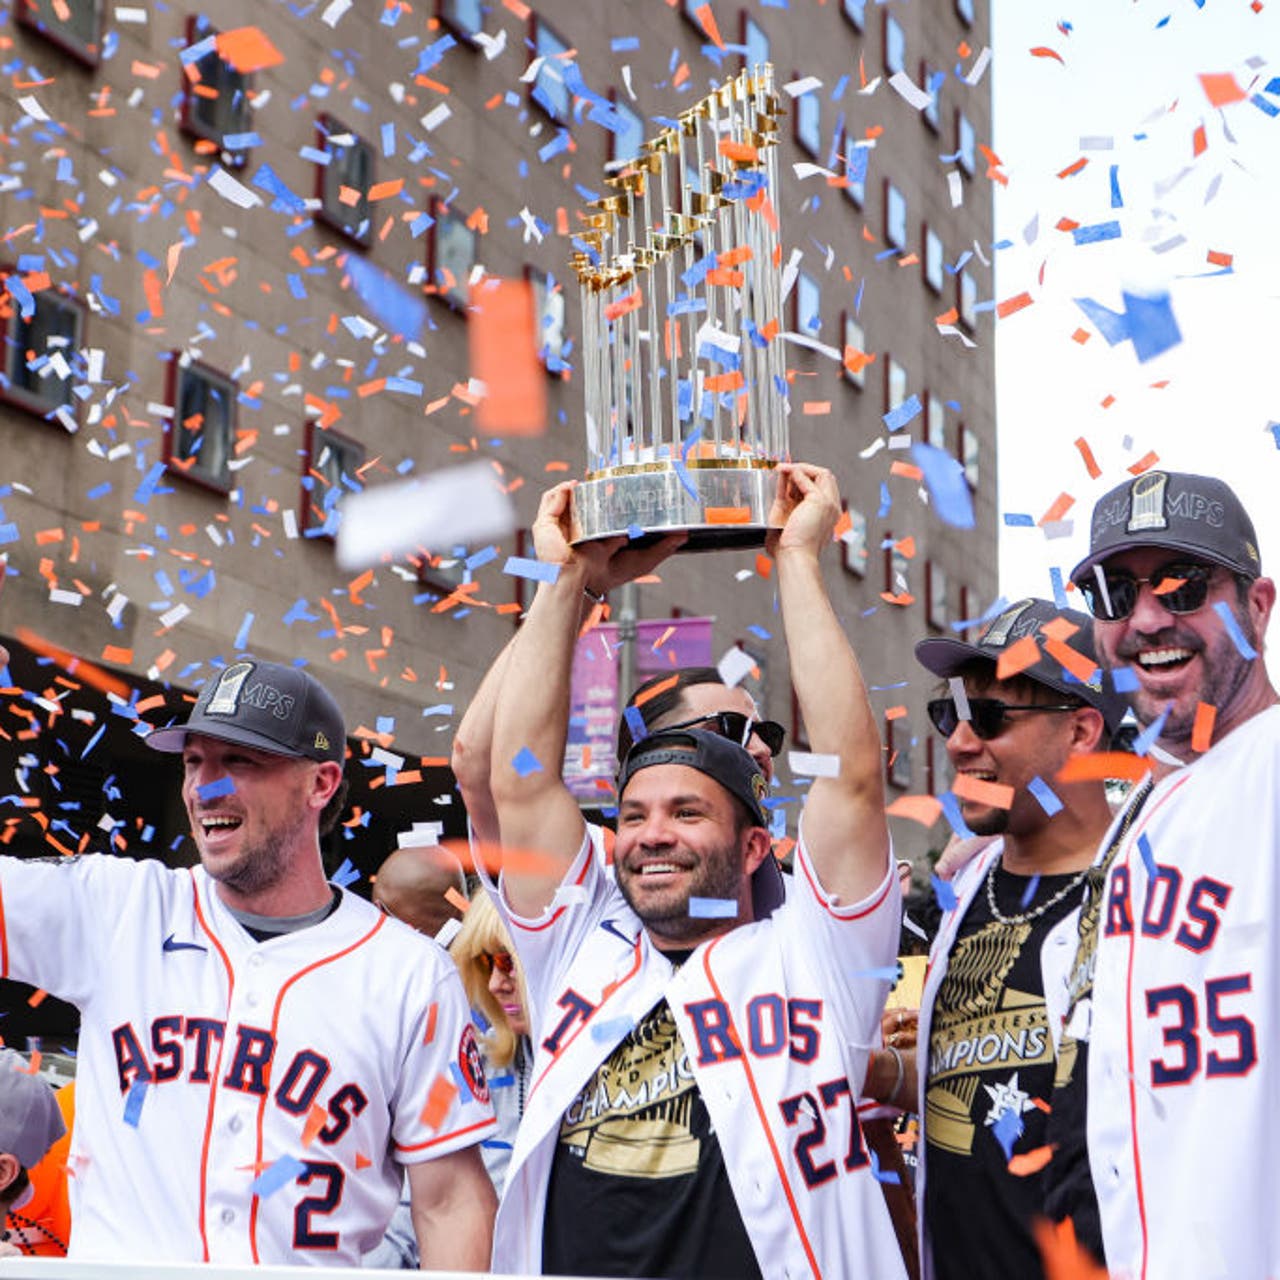 Grateful fans throng downtown for Astros victory parade